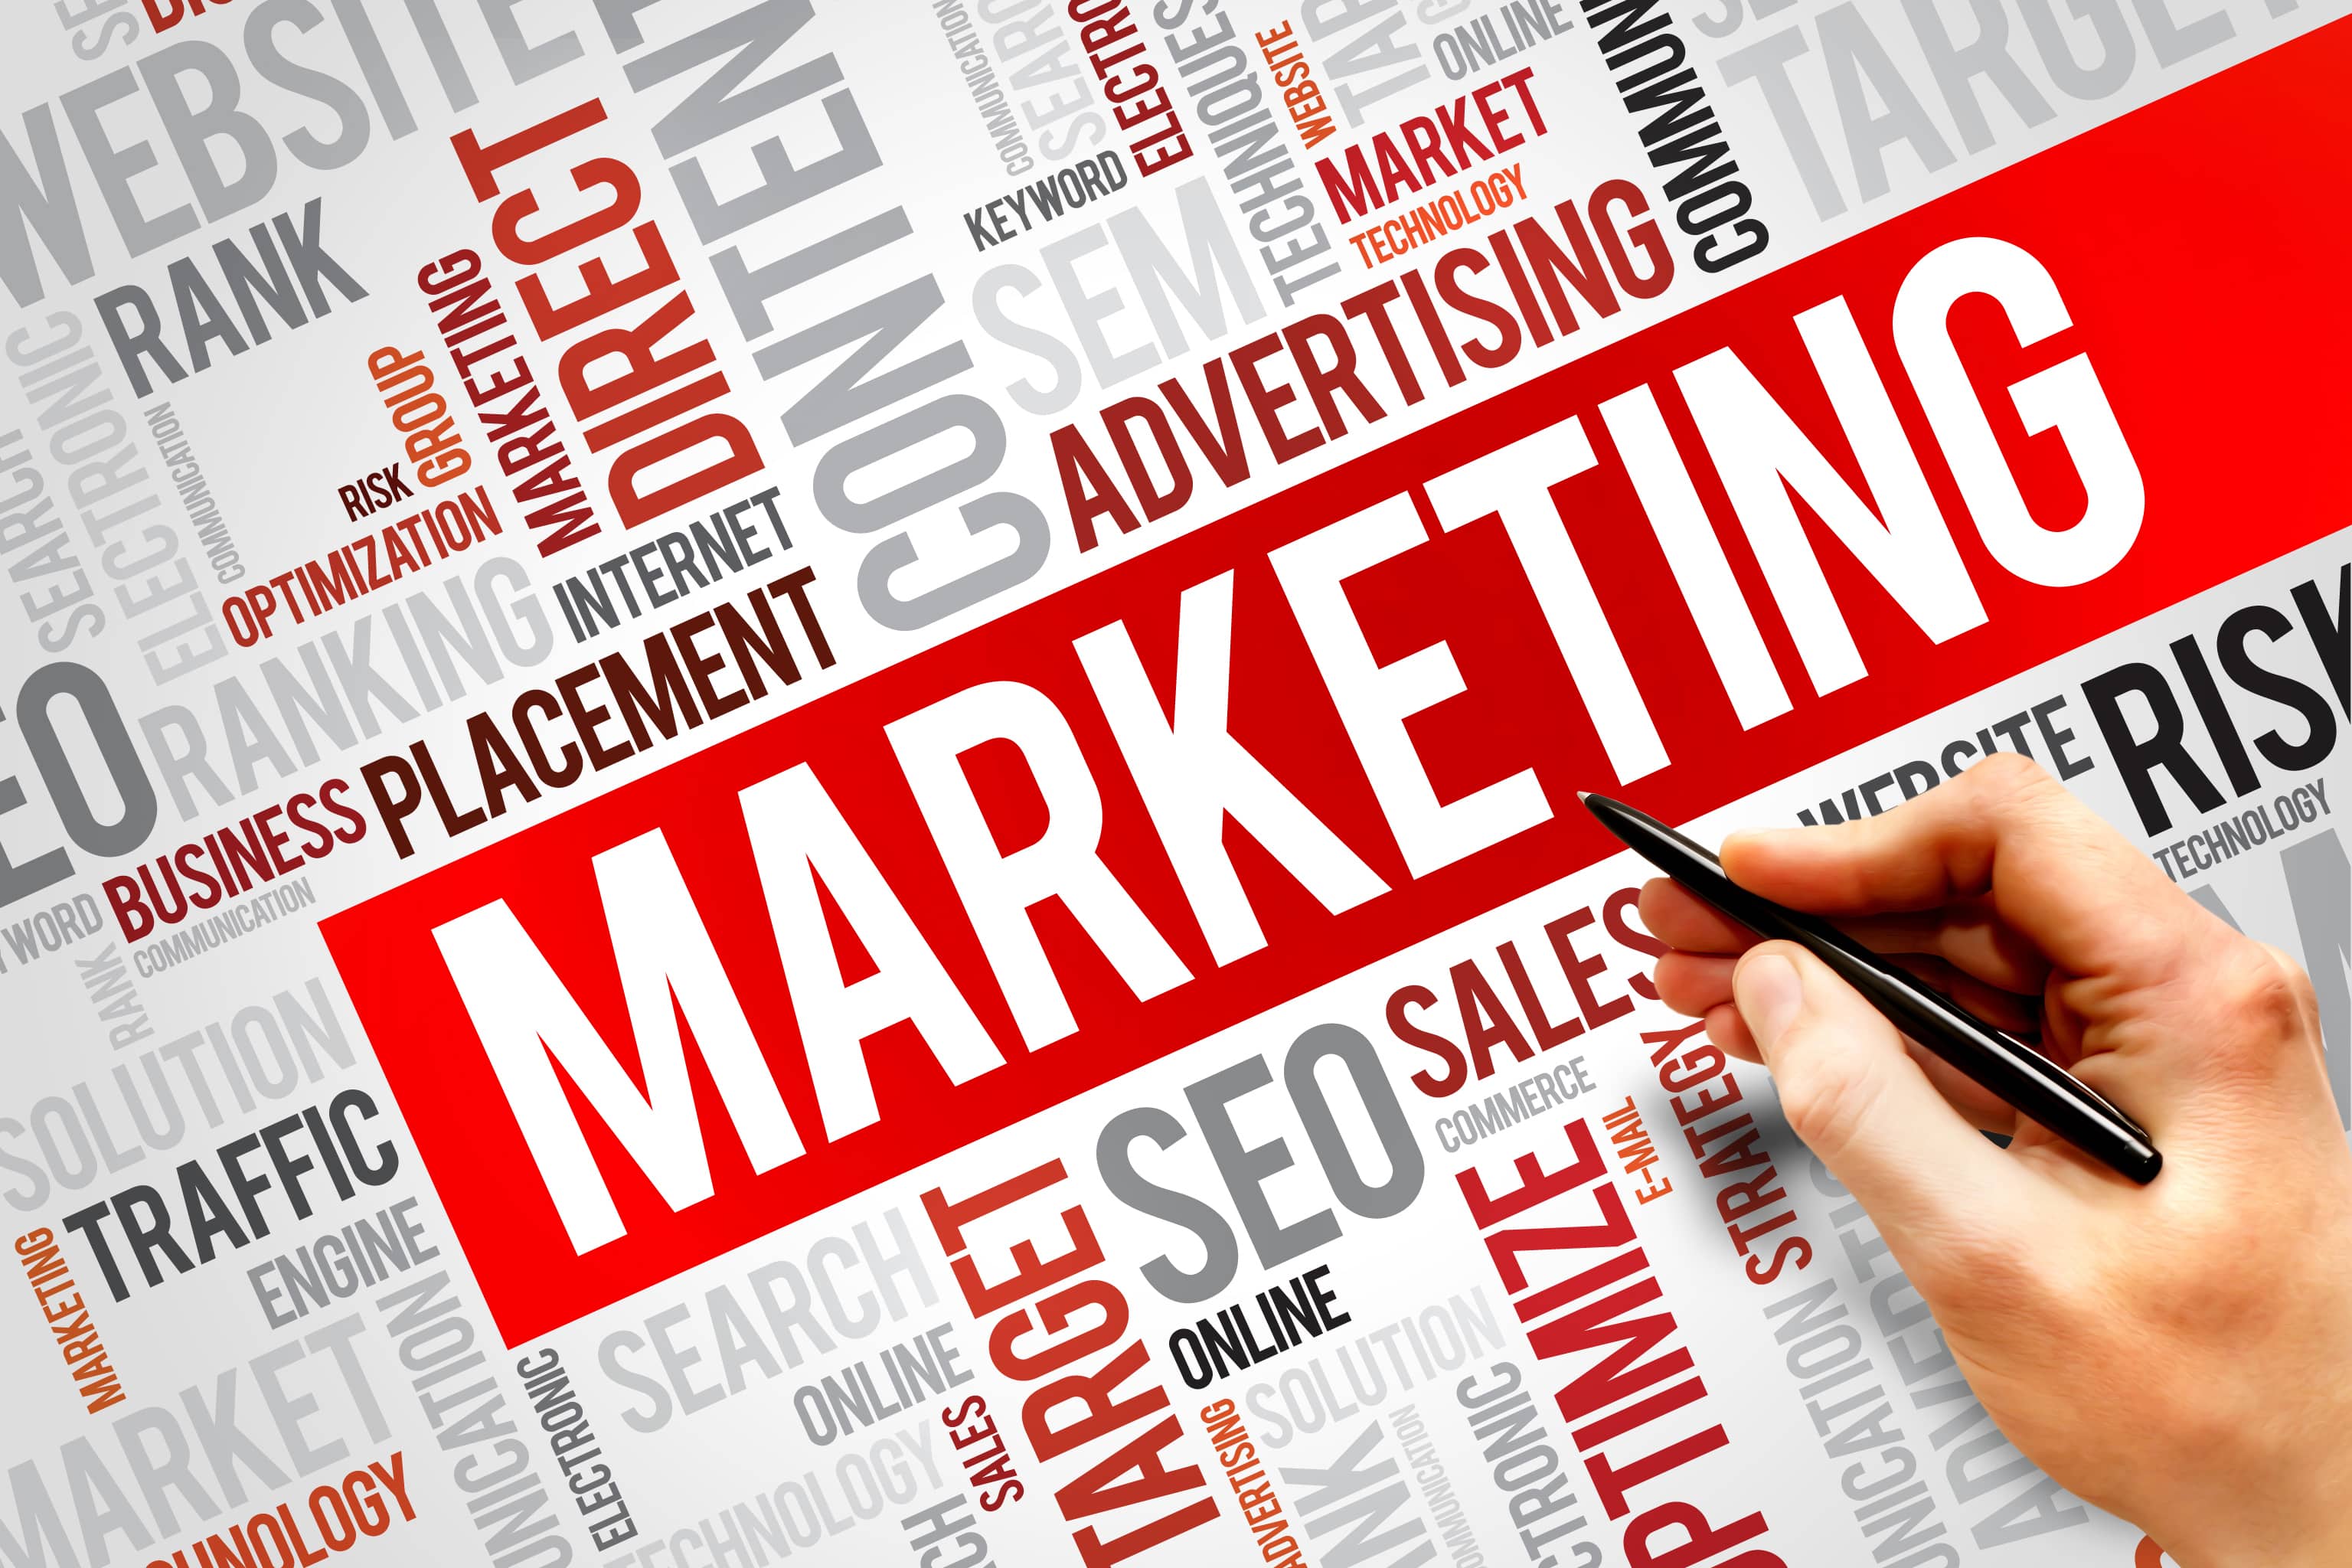 These are 5 marketing tactics every small business should be focusing